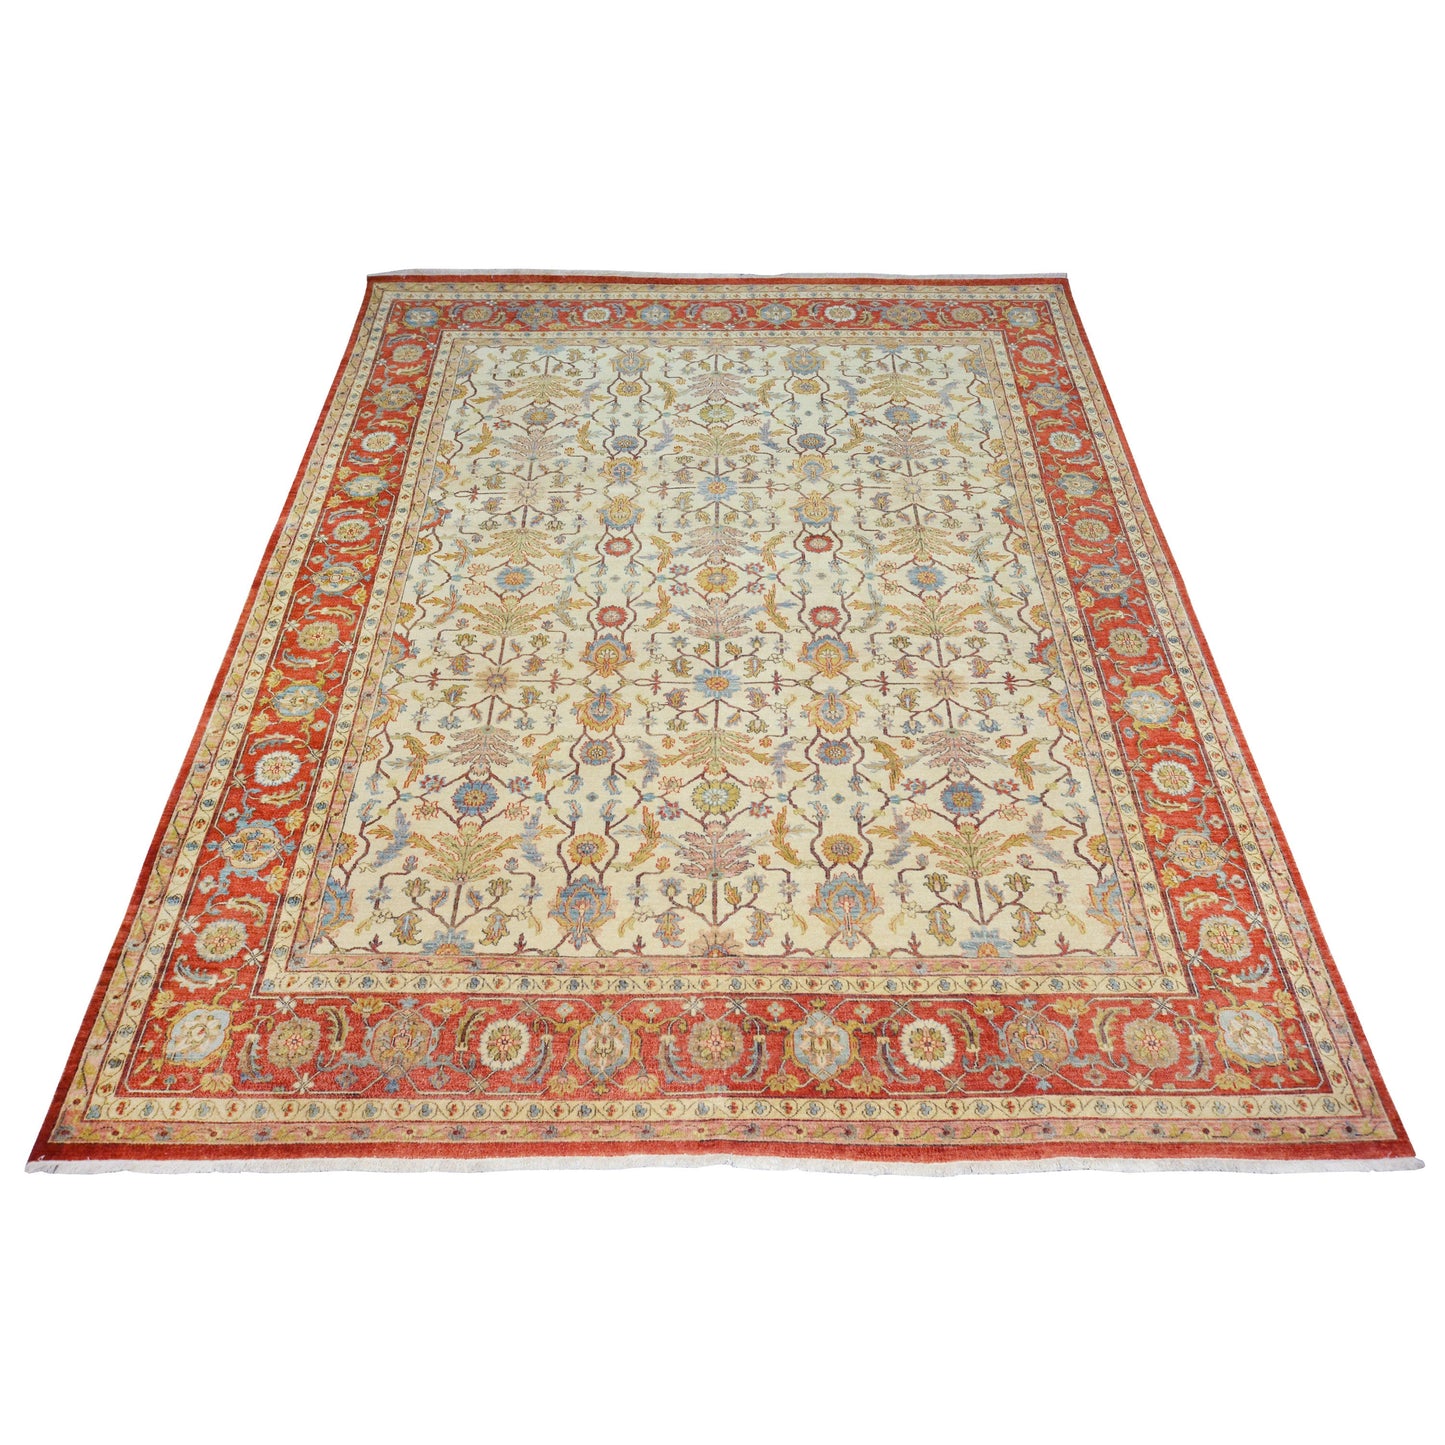 Get trendy with Garden Ivory and Rust Traditional Samarkand Pure Wool Luxury Handknotted Area Rug - Traditional Rugs available at Jaipur Oriental Rugs. Grab yours for $3165.00 today!